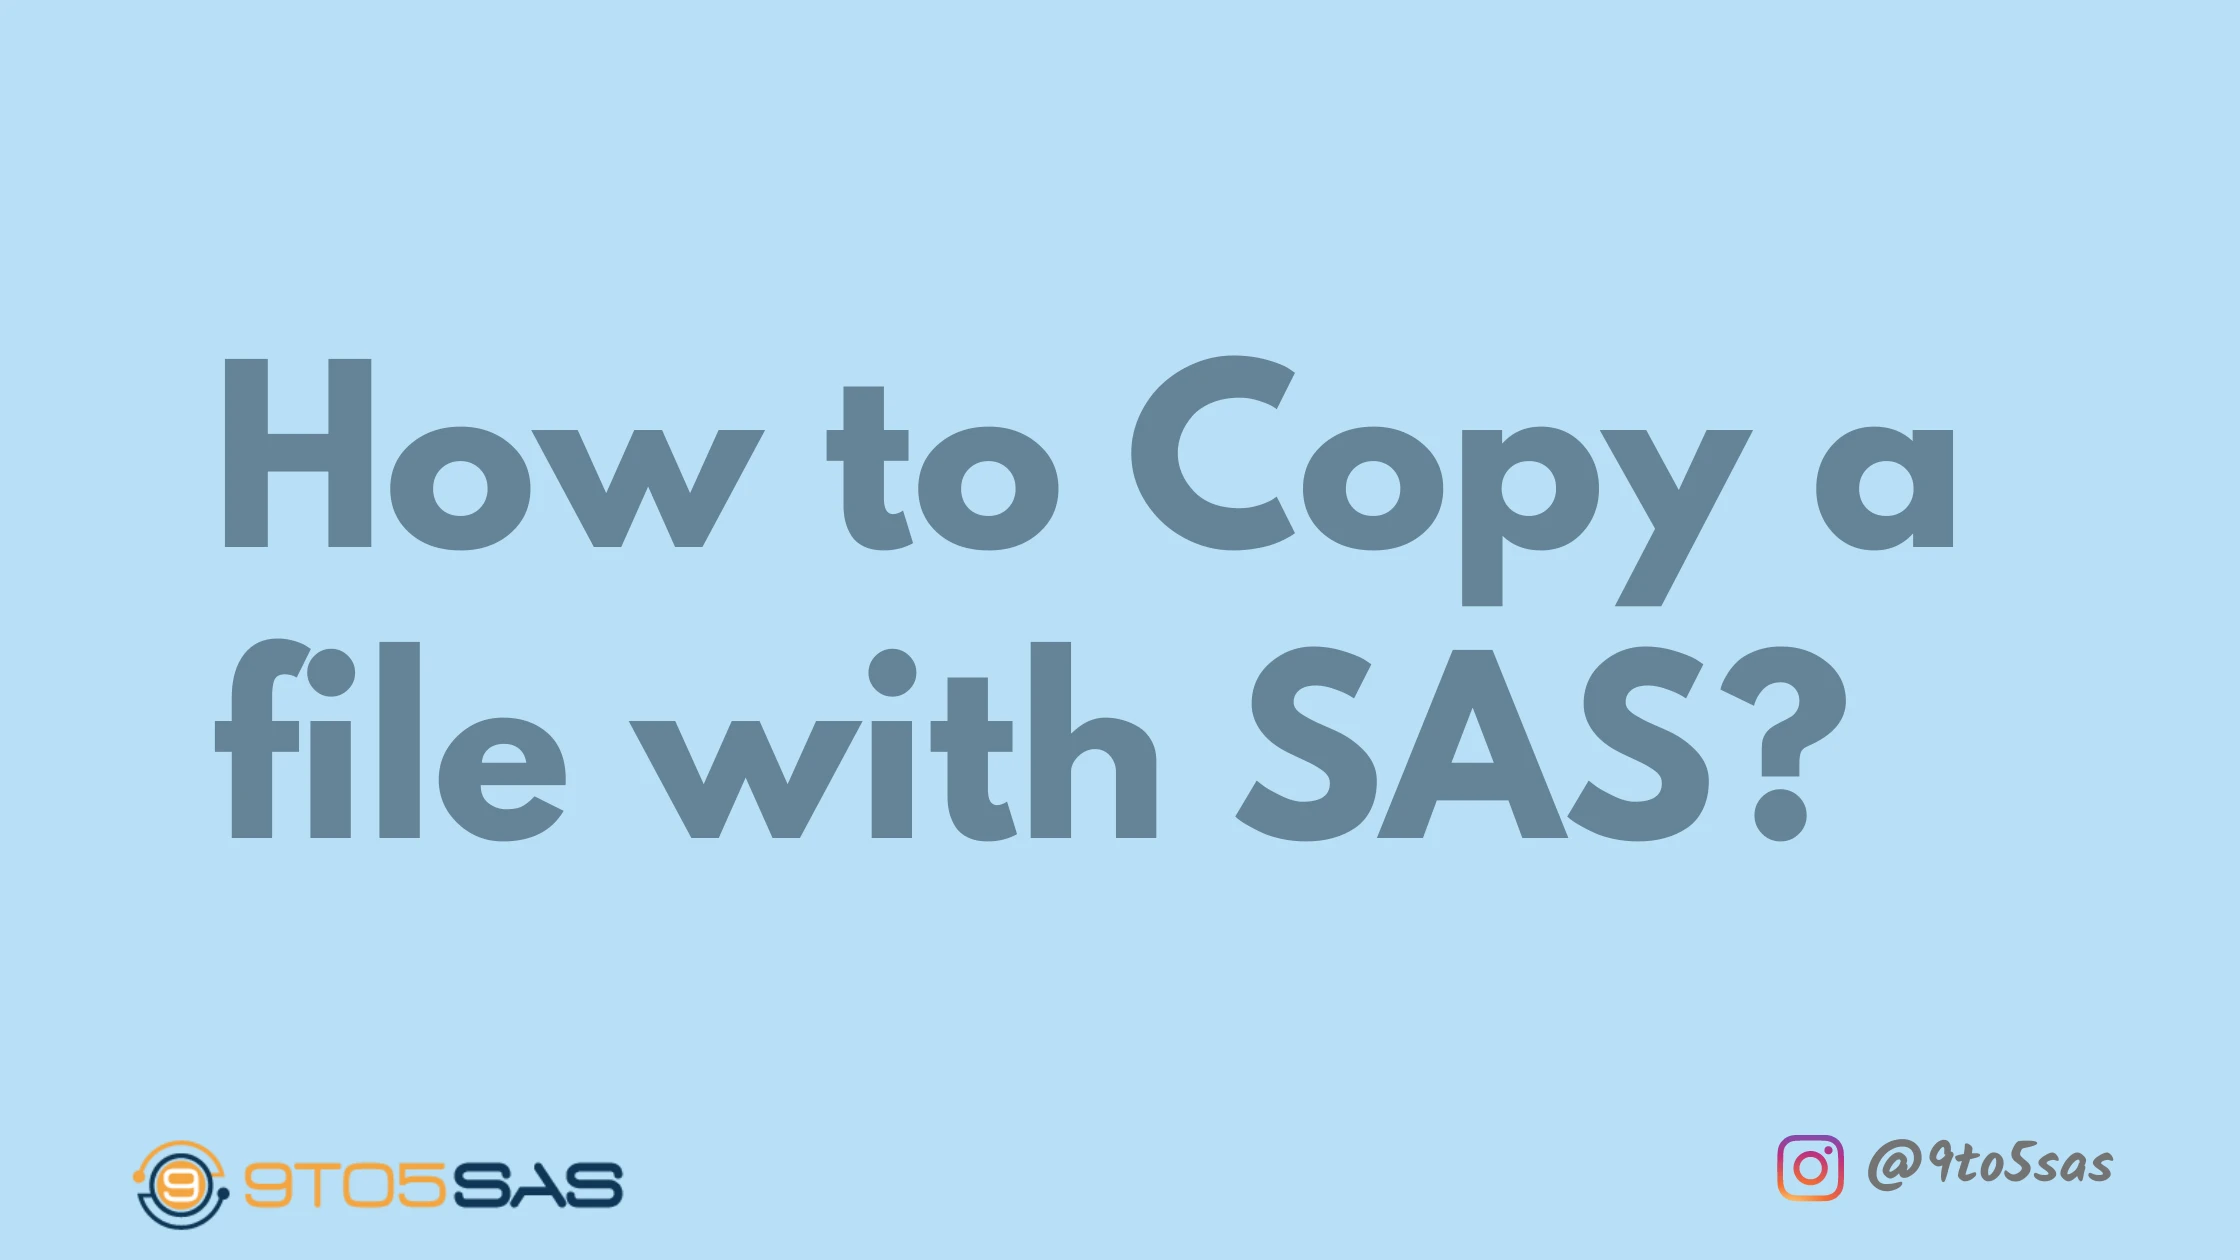 How to Copy a file with SAS?